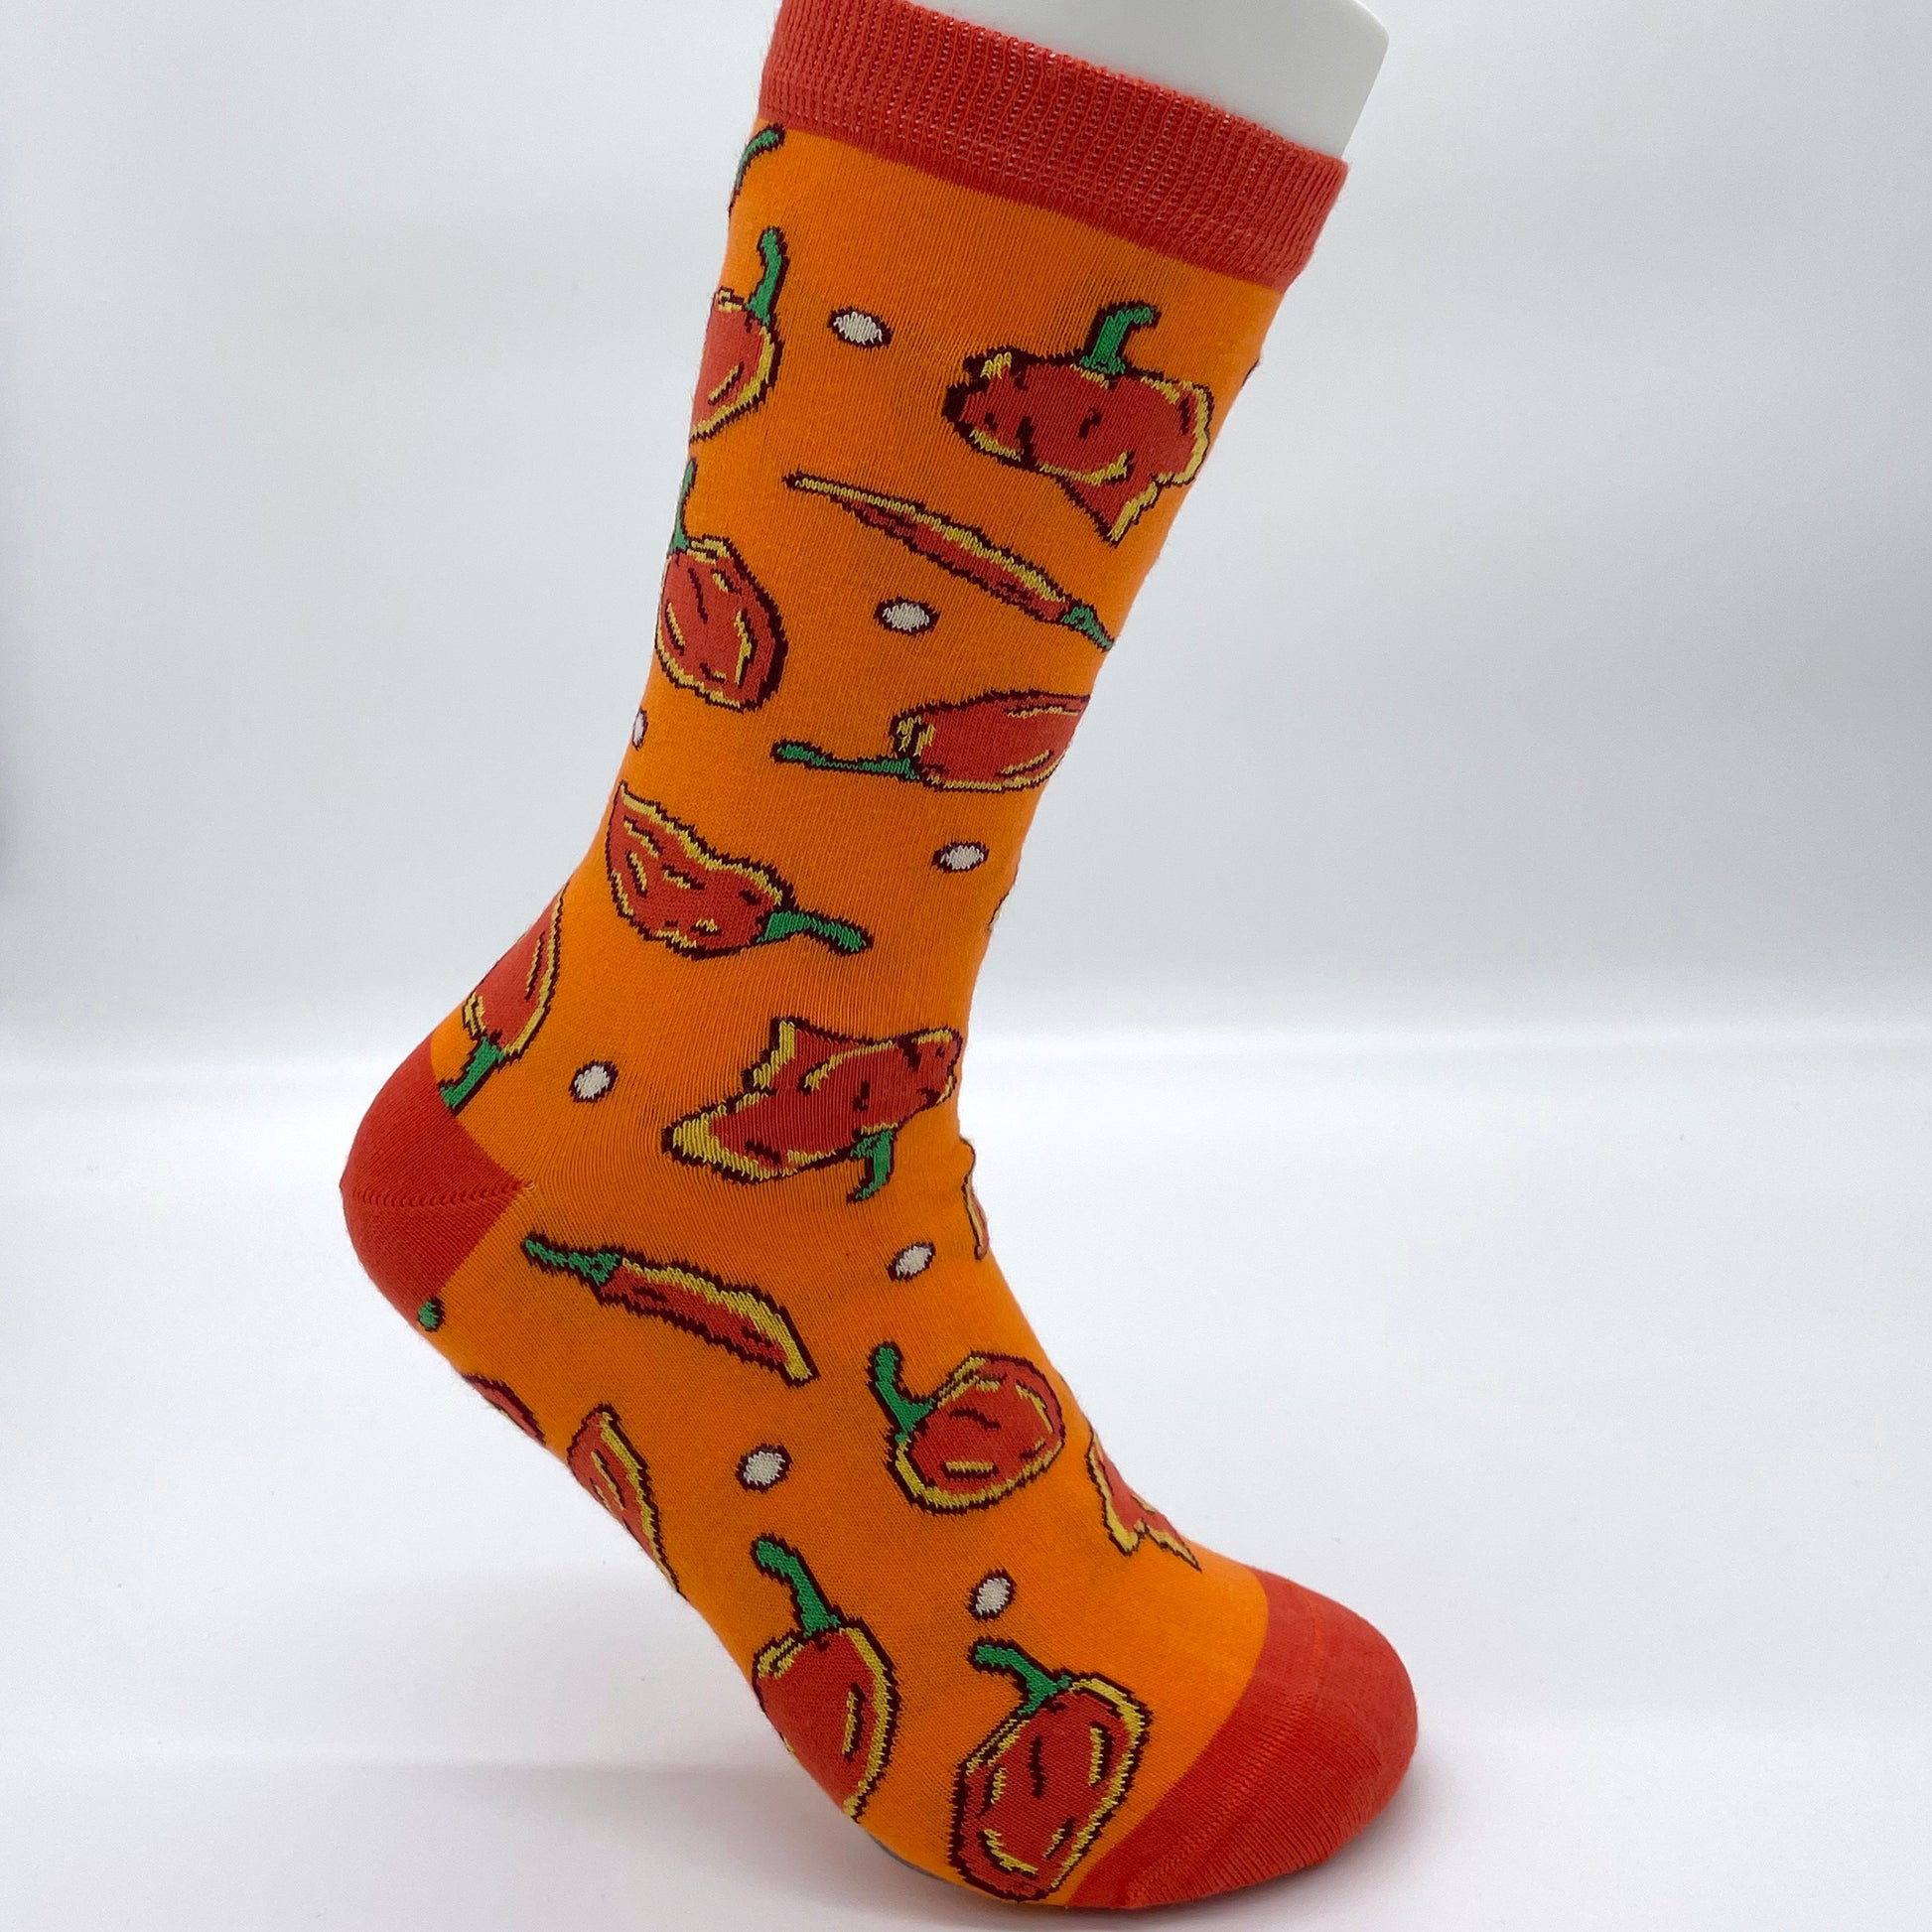 A white sock mannequin sports an orange sock patterned with a variety of spicy peppers in red. The heel, welt and toe of the sock are also red.